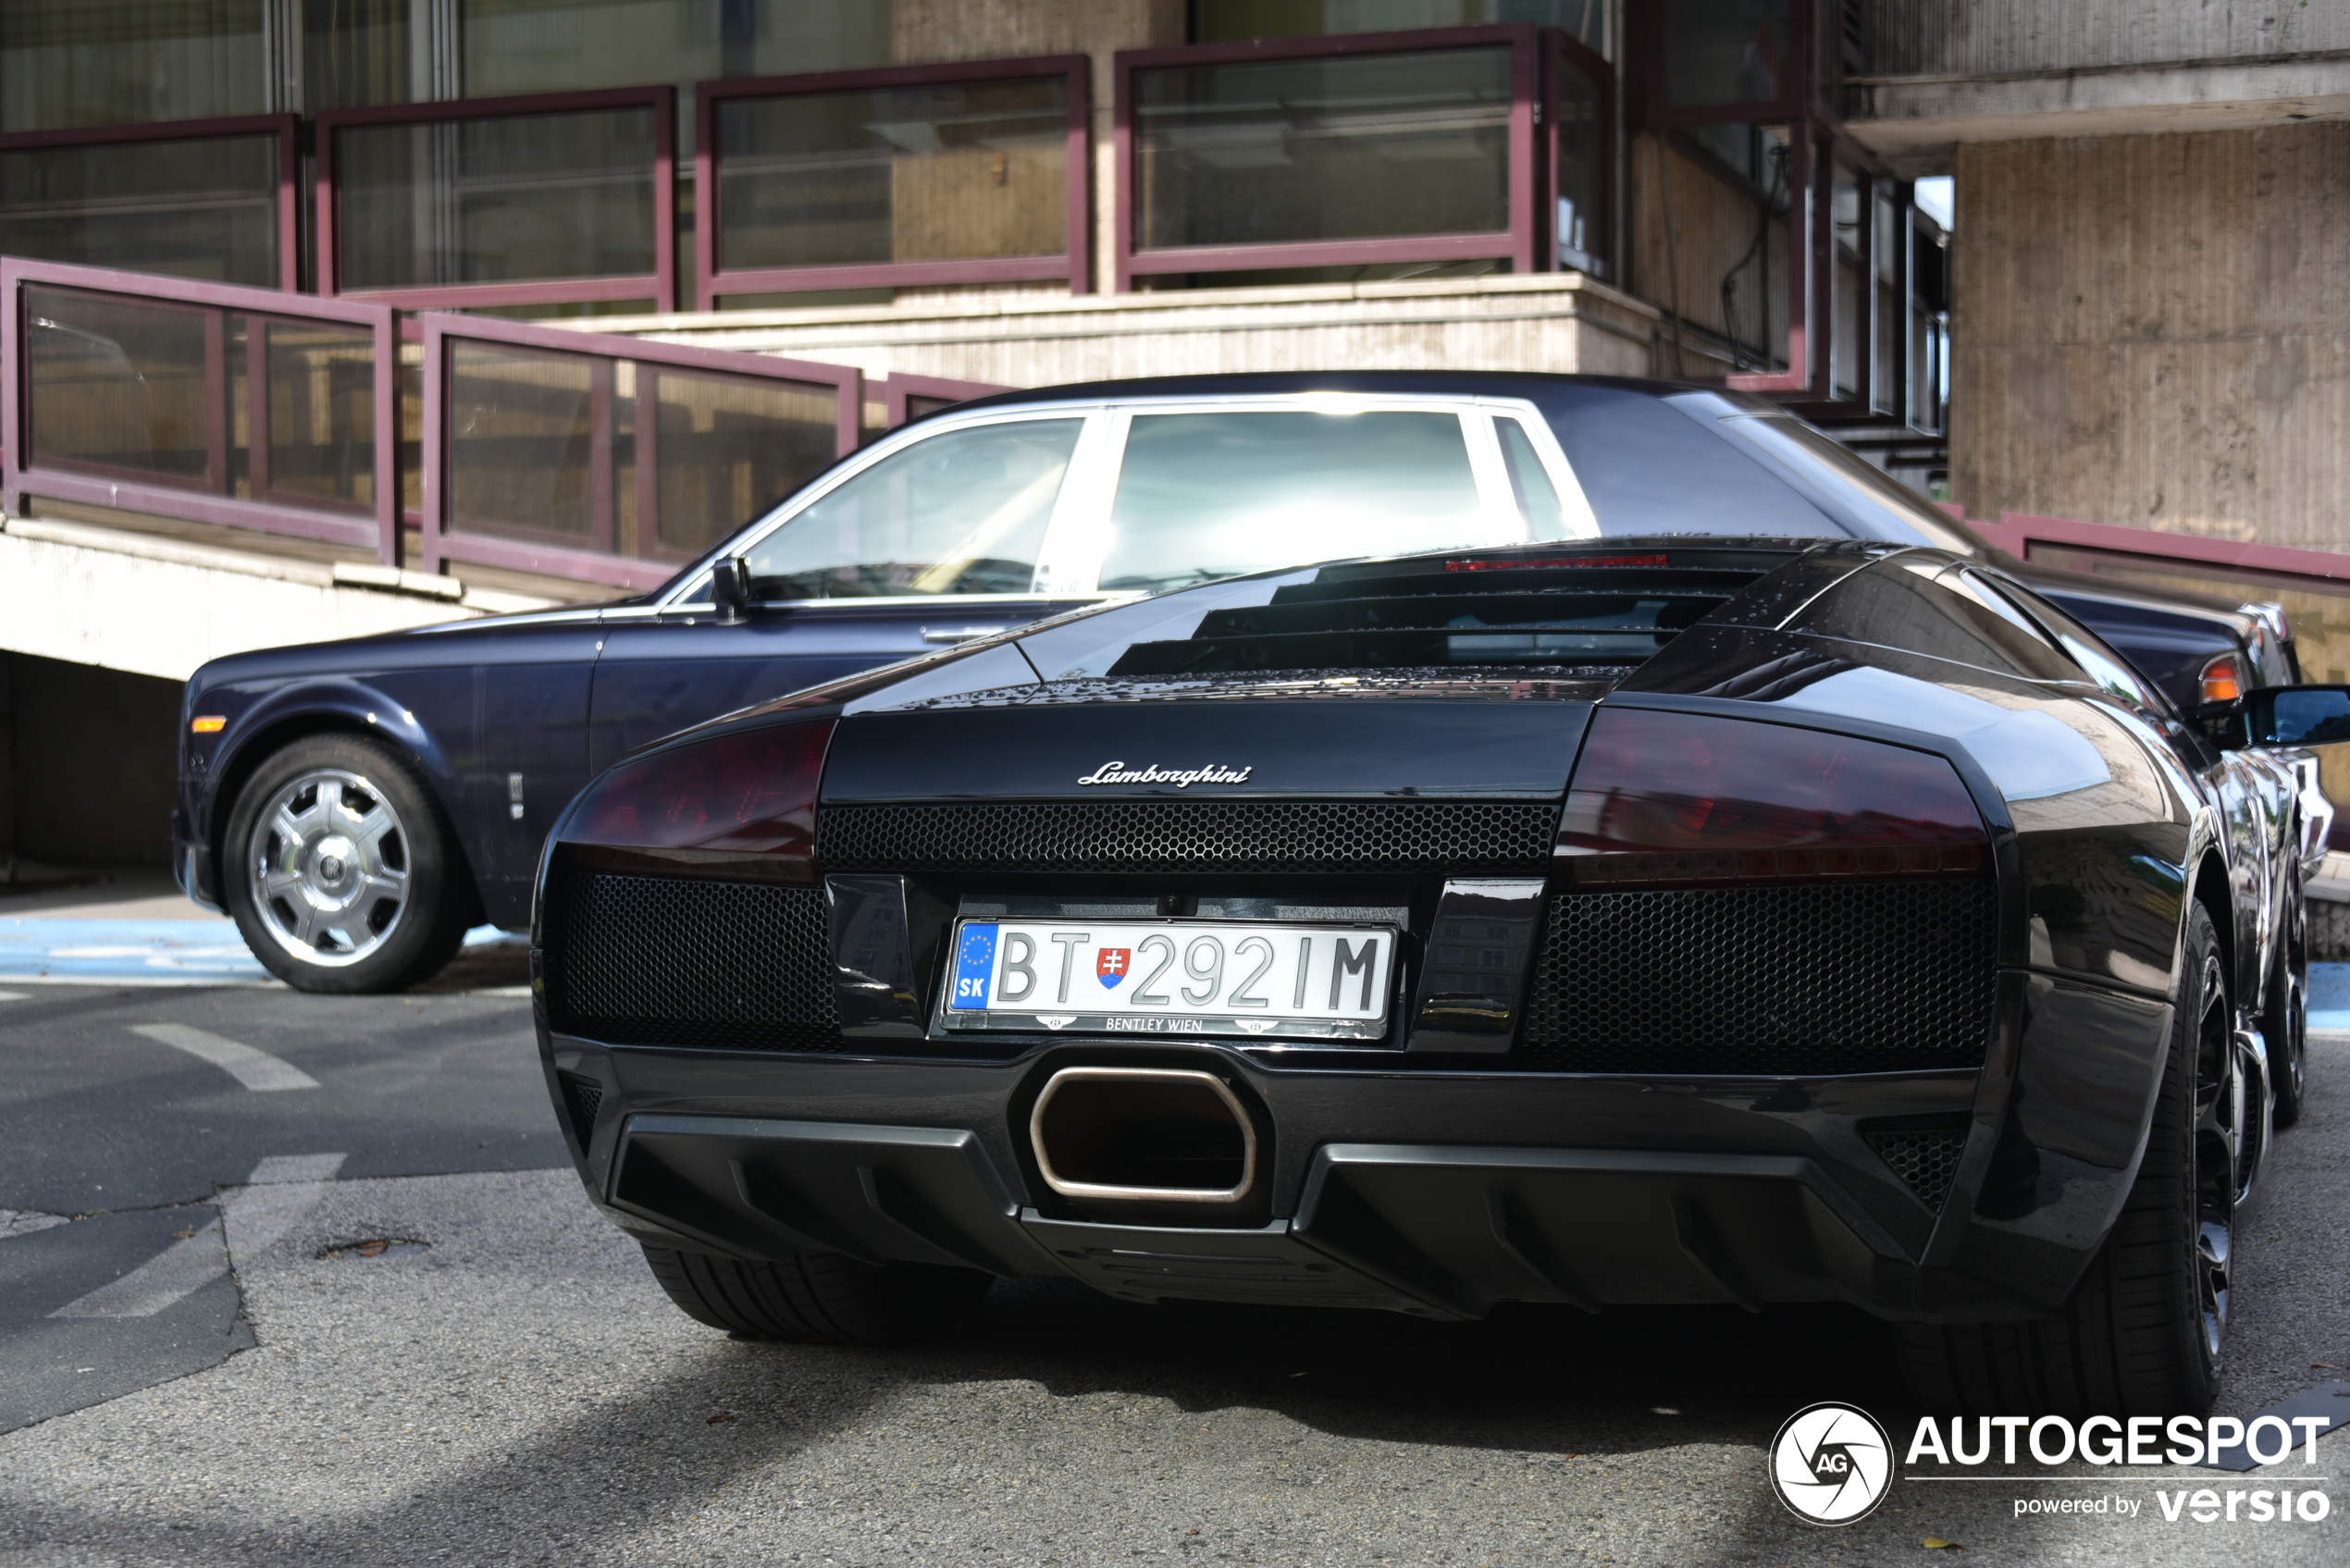 Does the Phantom truly steal the spotlight from every car?